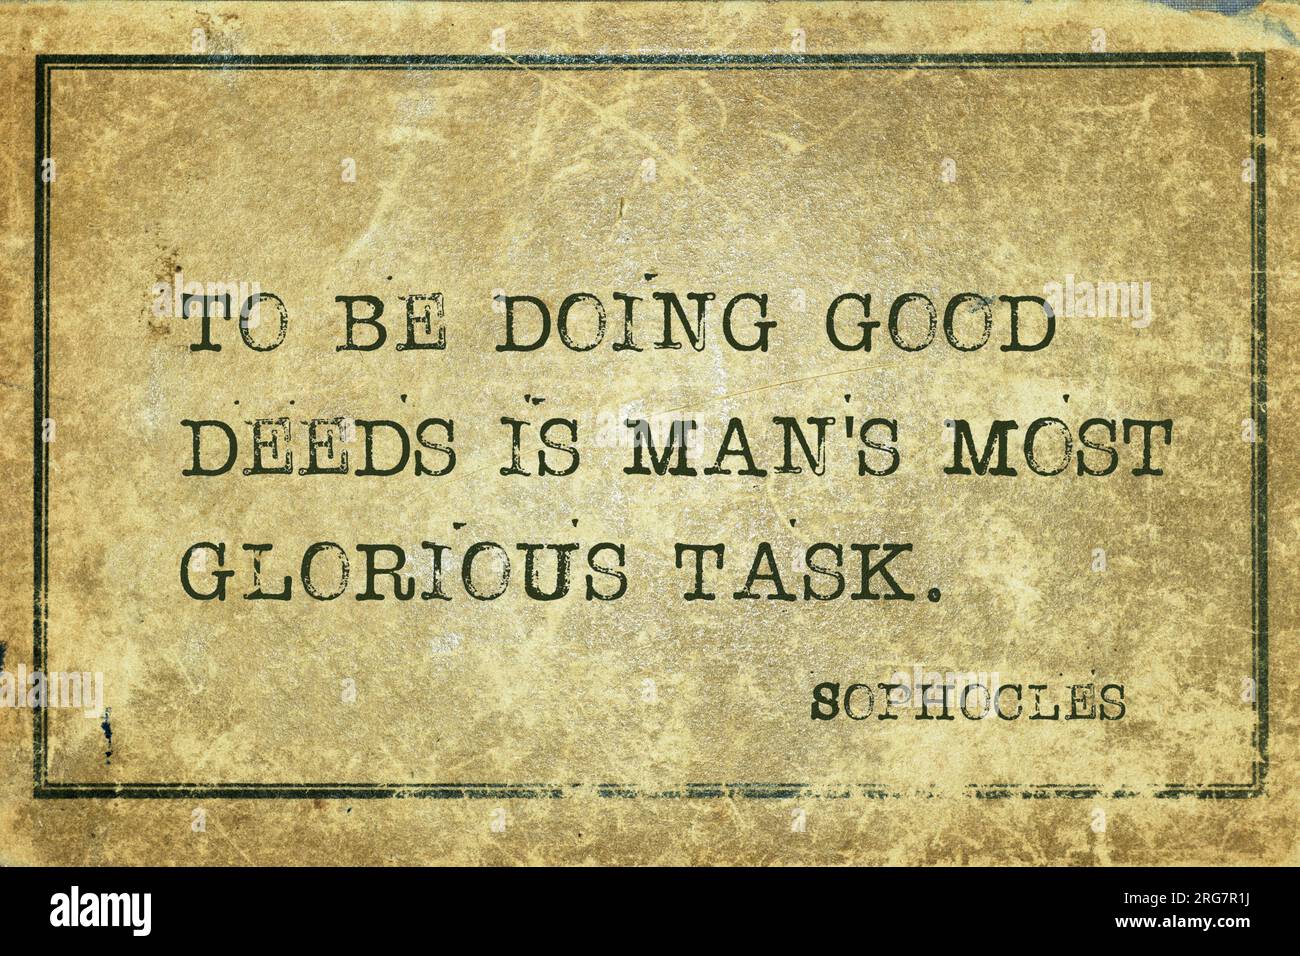 To be doing good deeds is man's most glorious task - ancient Greek philosopher Sophocles quote printed on grunge vintage cardboard Stock Photo